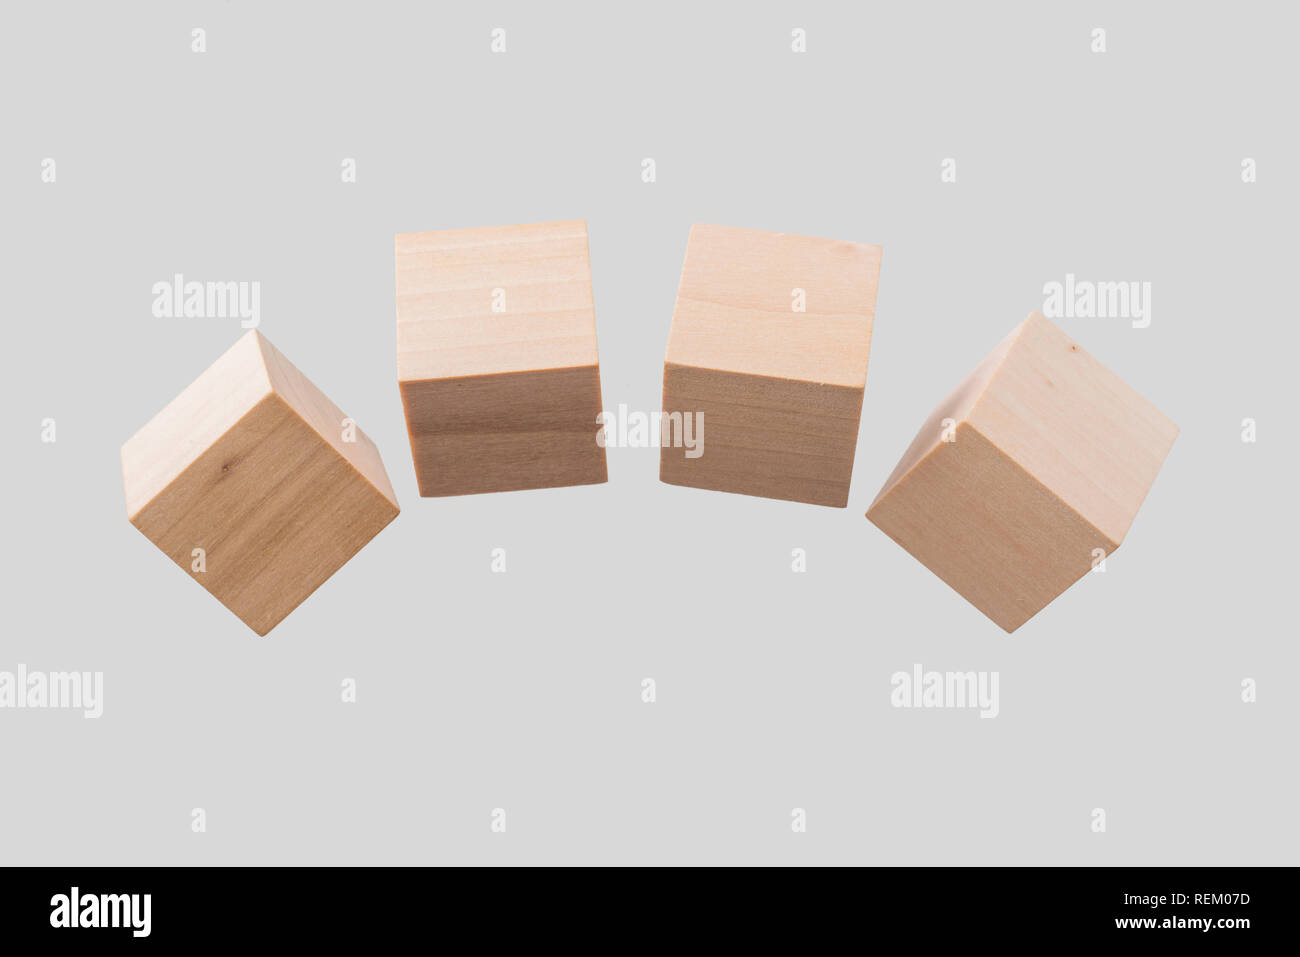 Business & design concept - Abstract geometric real floating wooden cube isolated on background, it's not 3D render. Stock Photo